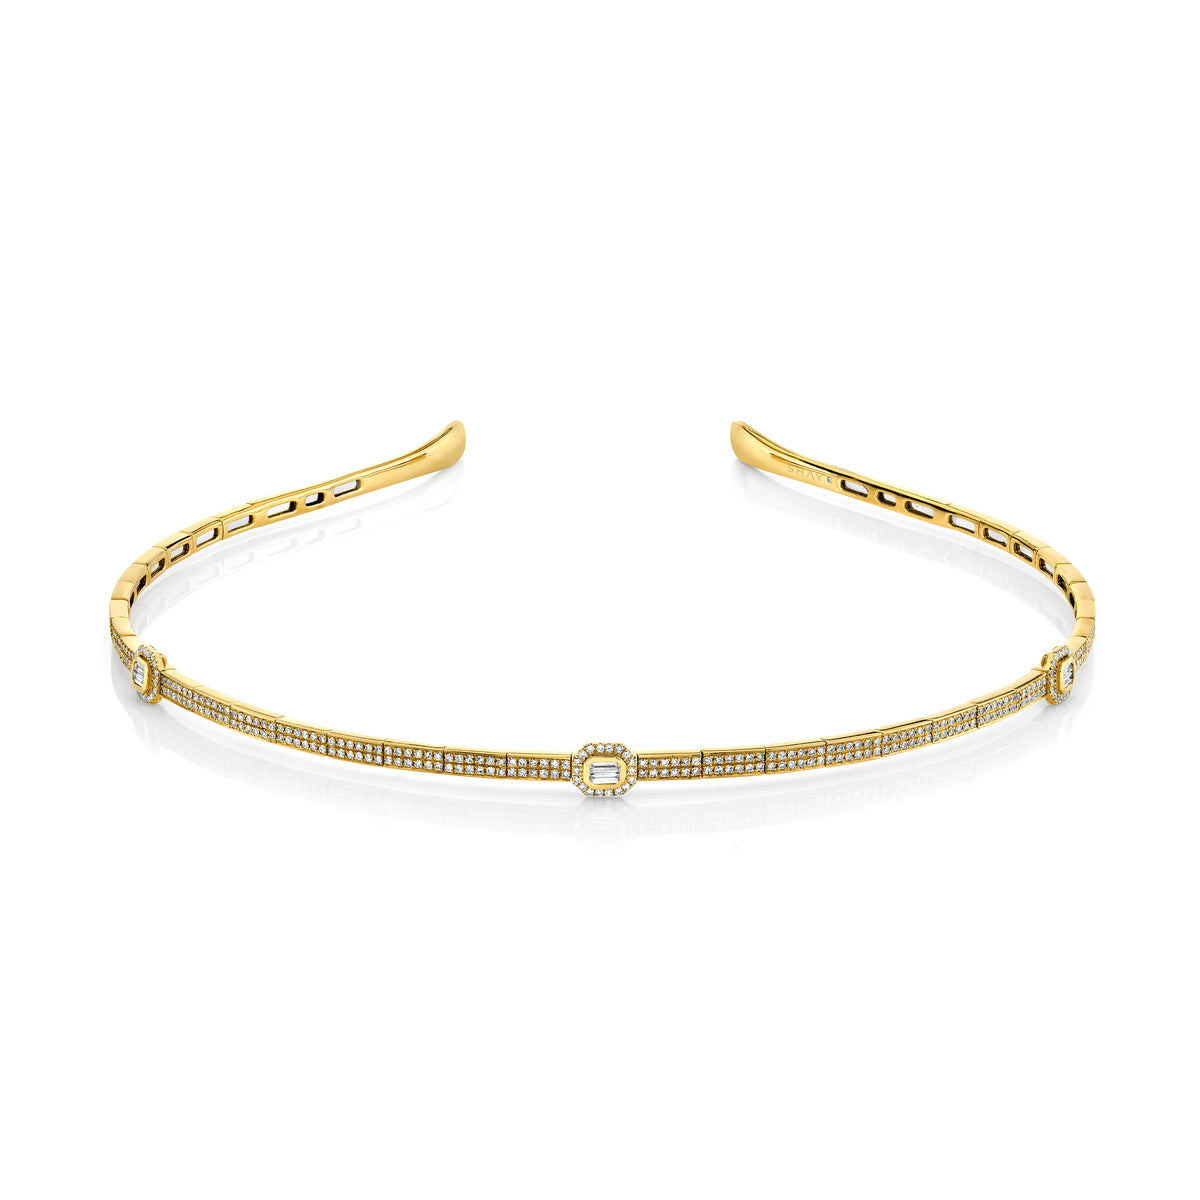 READY TO SHIP DIAMOND PAVE BAGUETTE CLUSTER HEADBAND